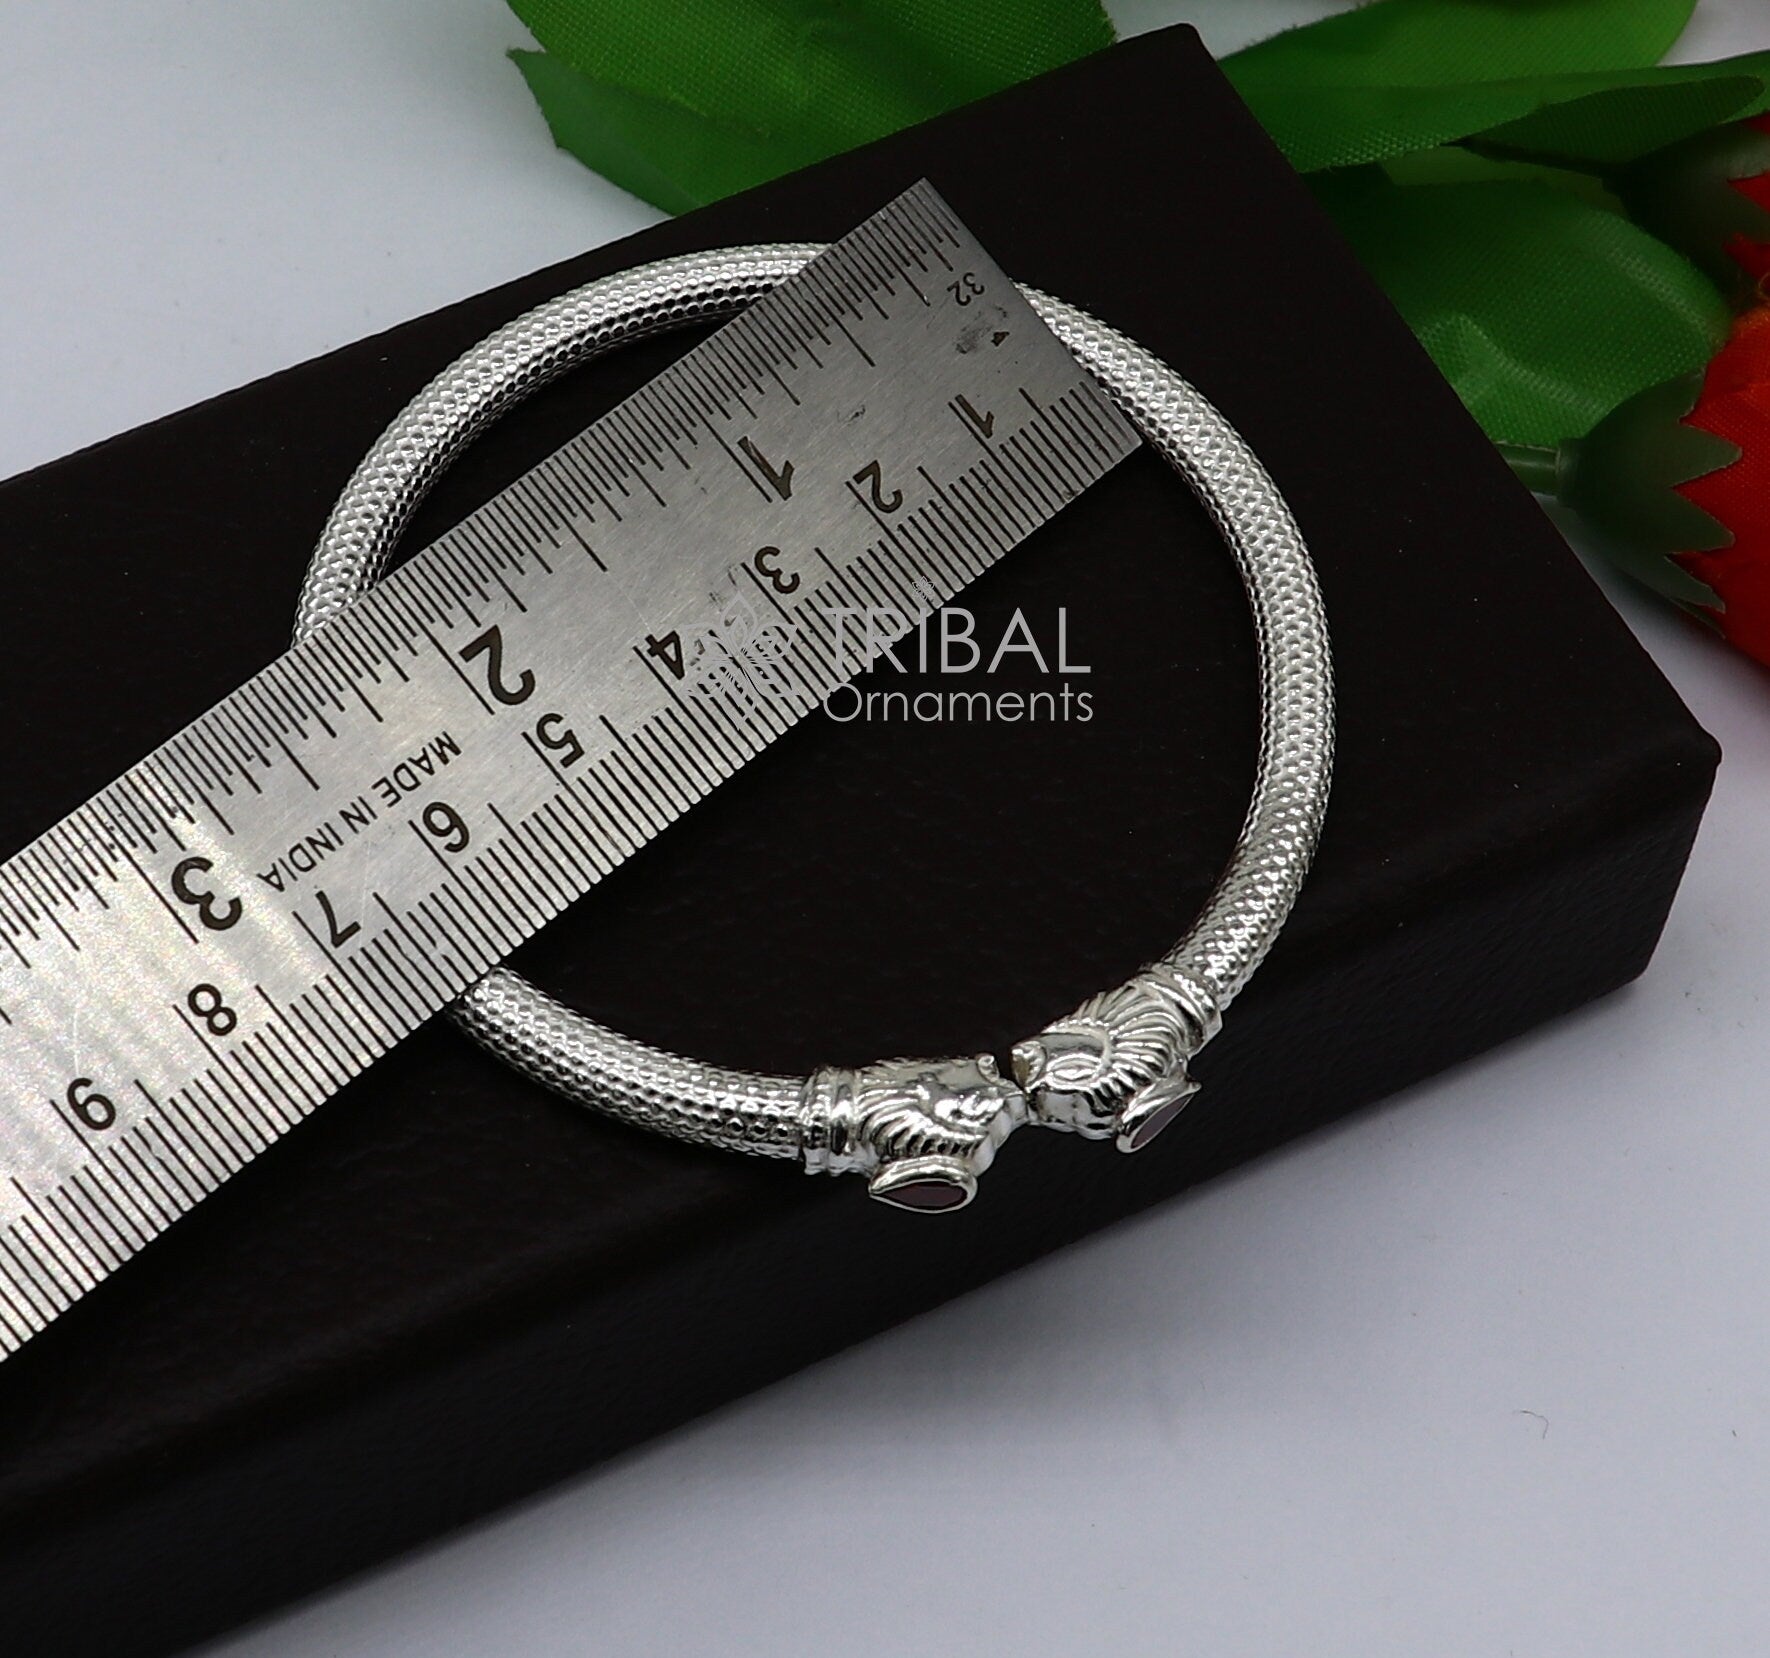 925 sterling silver handmade lion face design cultural trendy kada bracelet for men's and girl's, best delicate Light weight jewelry nsk663 - TRIBAL ORNAMENTS